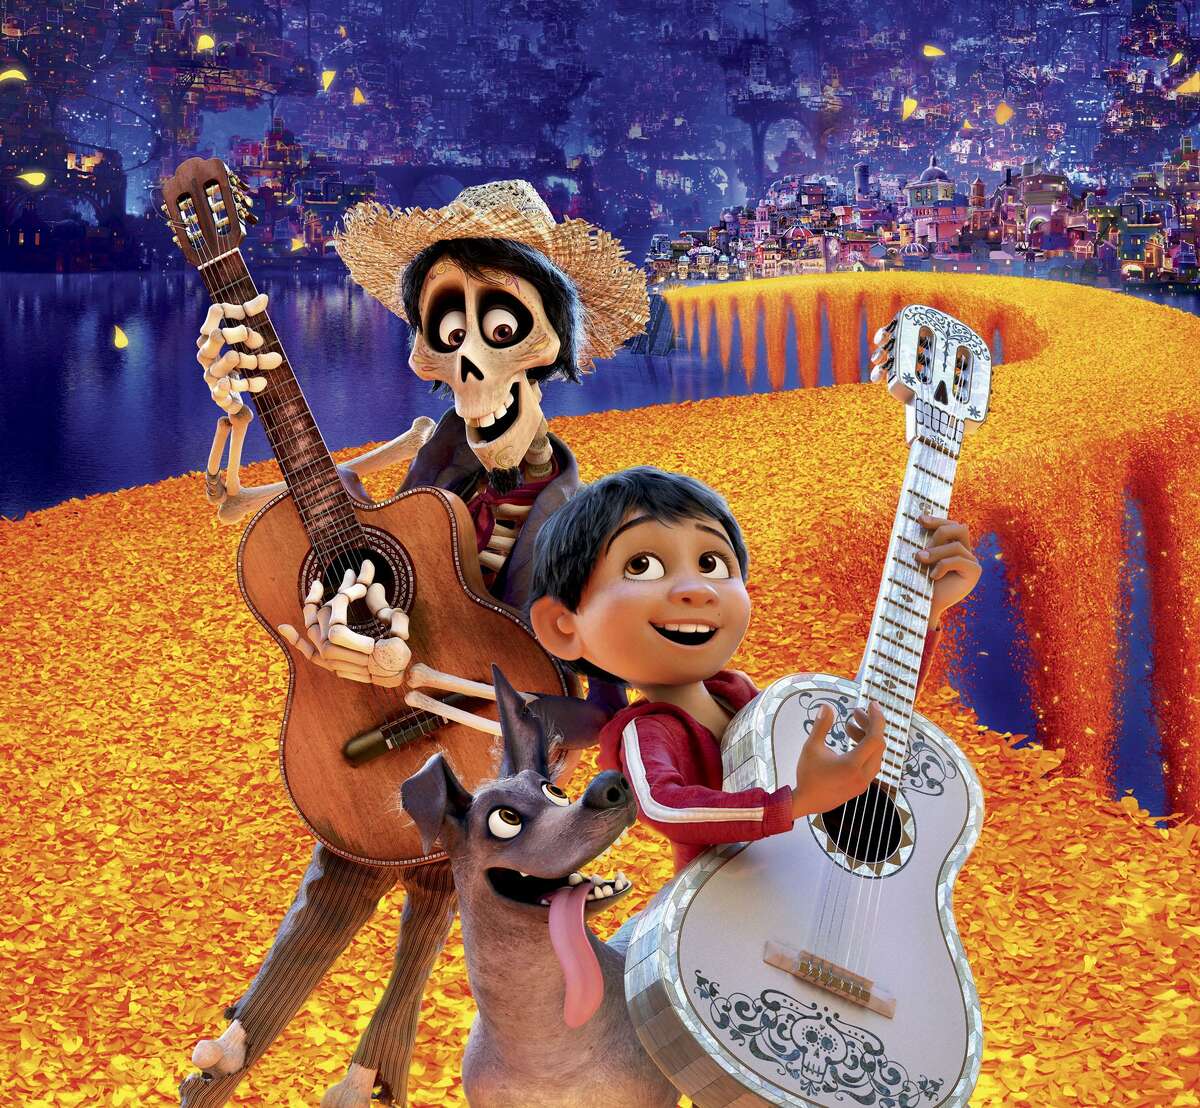 The movie “Coco” demonstrates that a movie about Latinos is best told by Latinos.